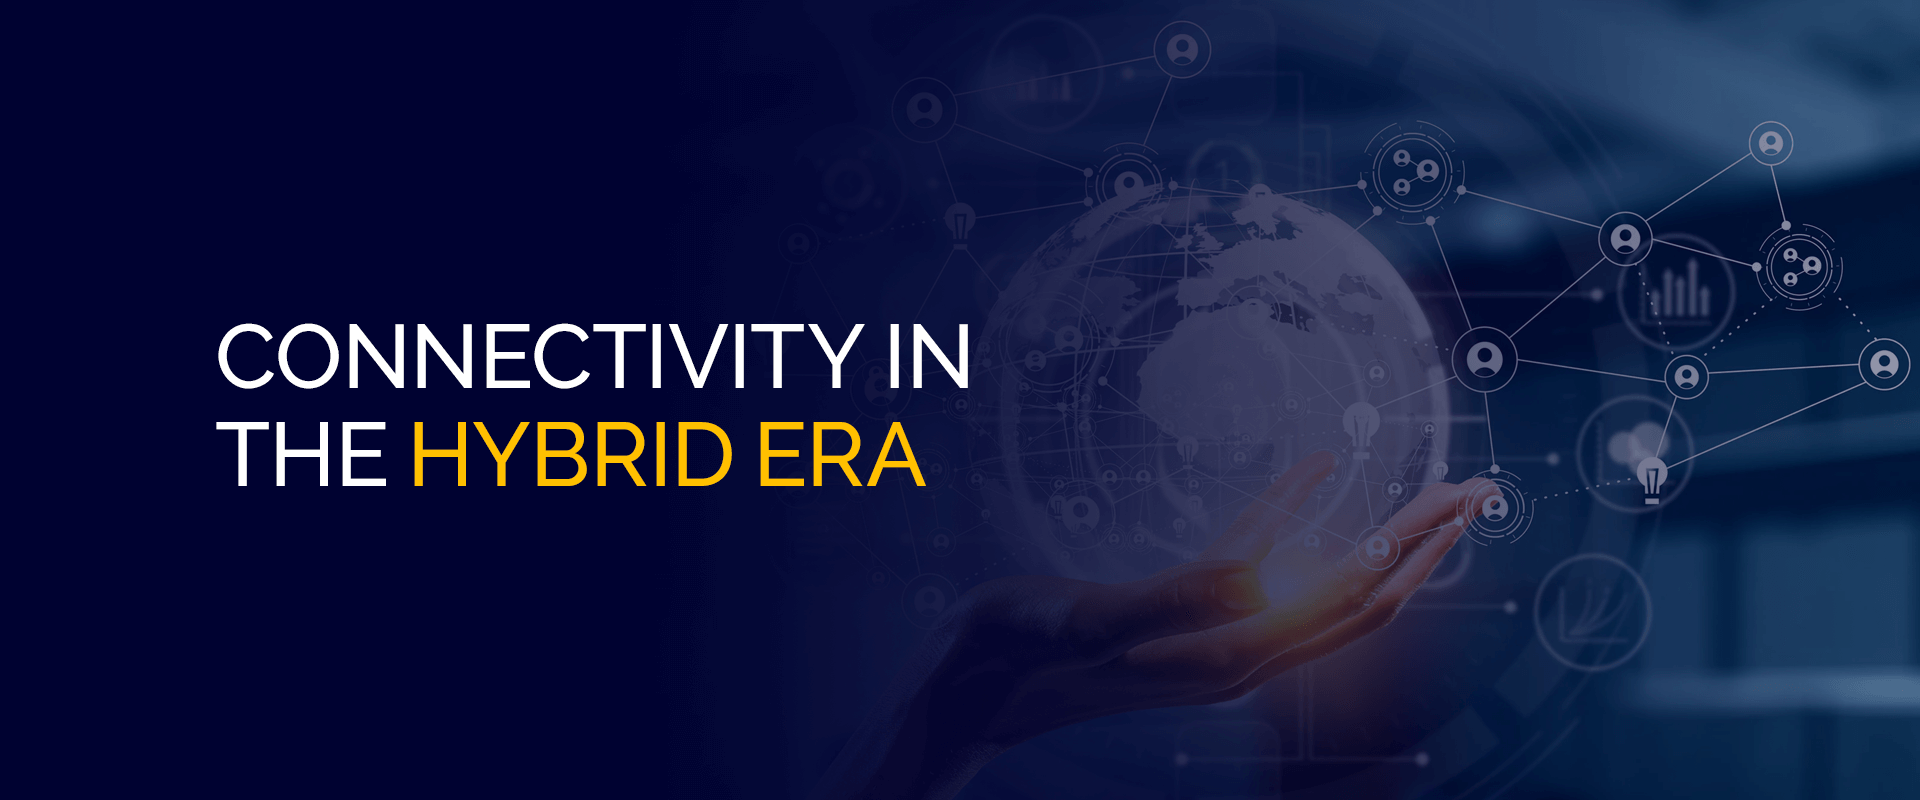 Connectivity In The Hybrid Era